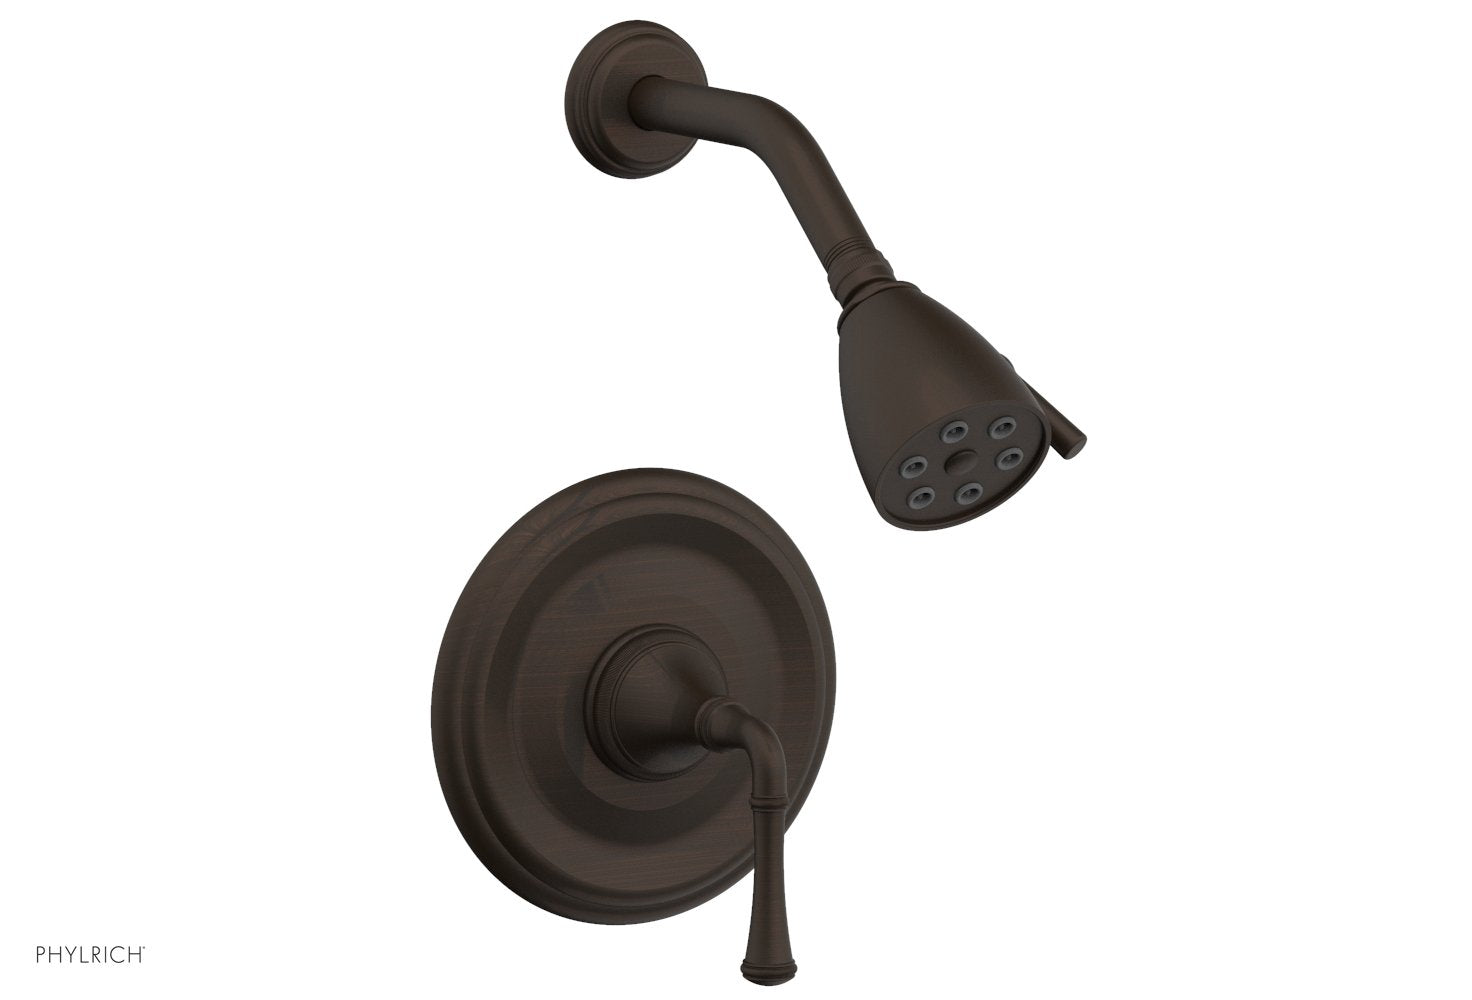 Phylrich COINED Pressure Balance Shower Set - Lever Handle